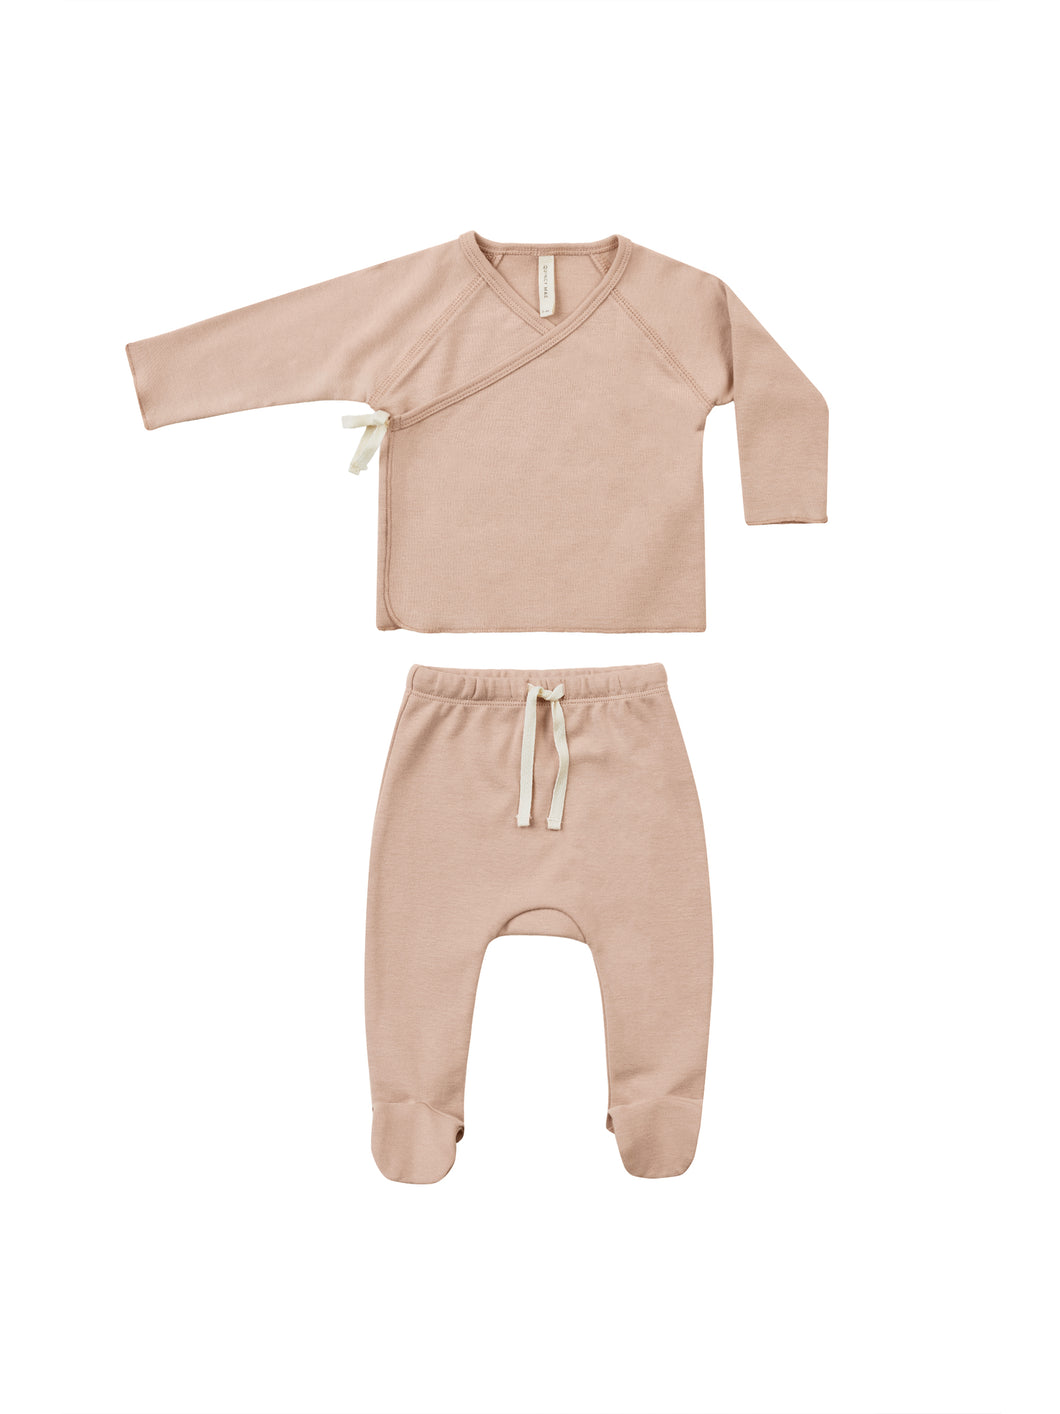 Organic Cotton wrap top and footed Sleeper in the colour blush. 